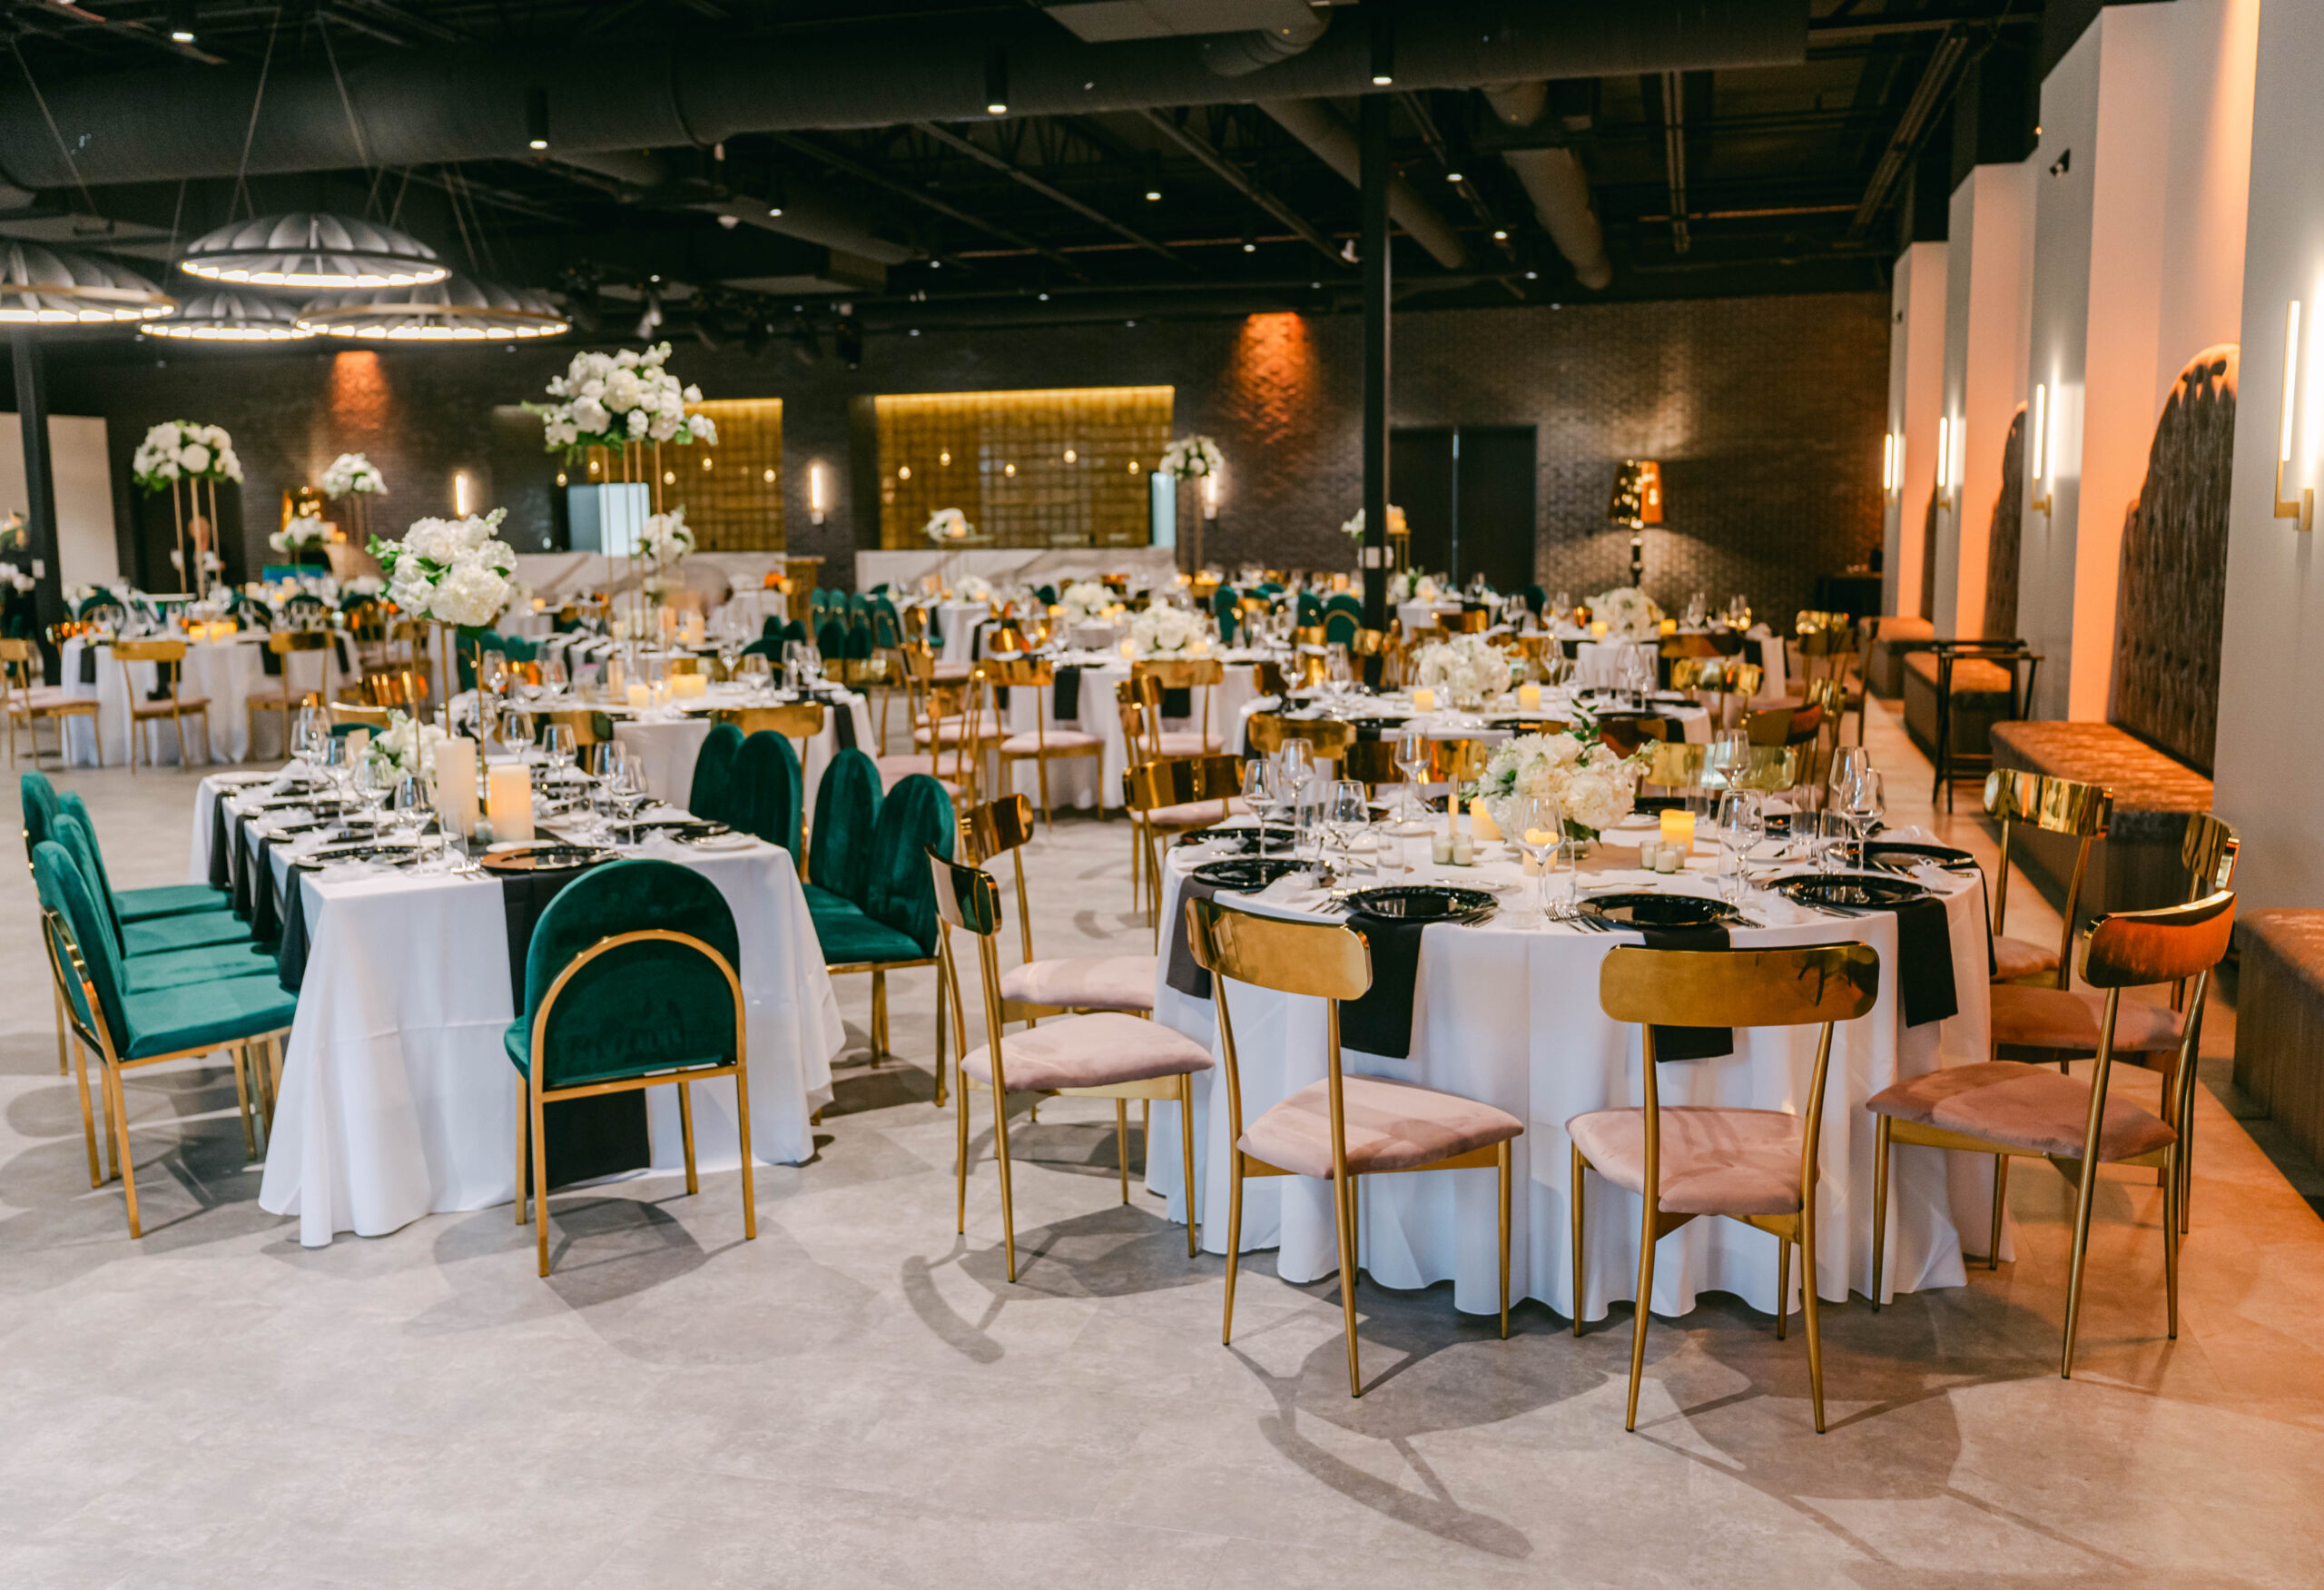 The reverie reception space